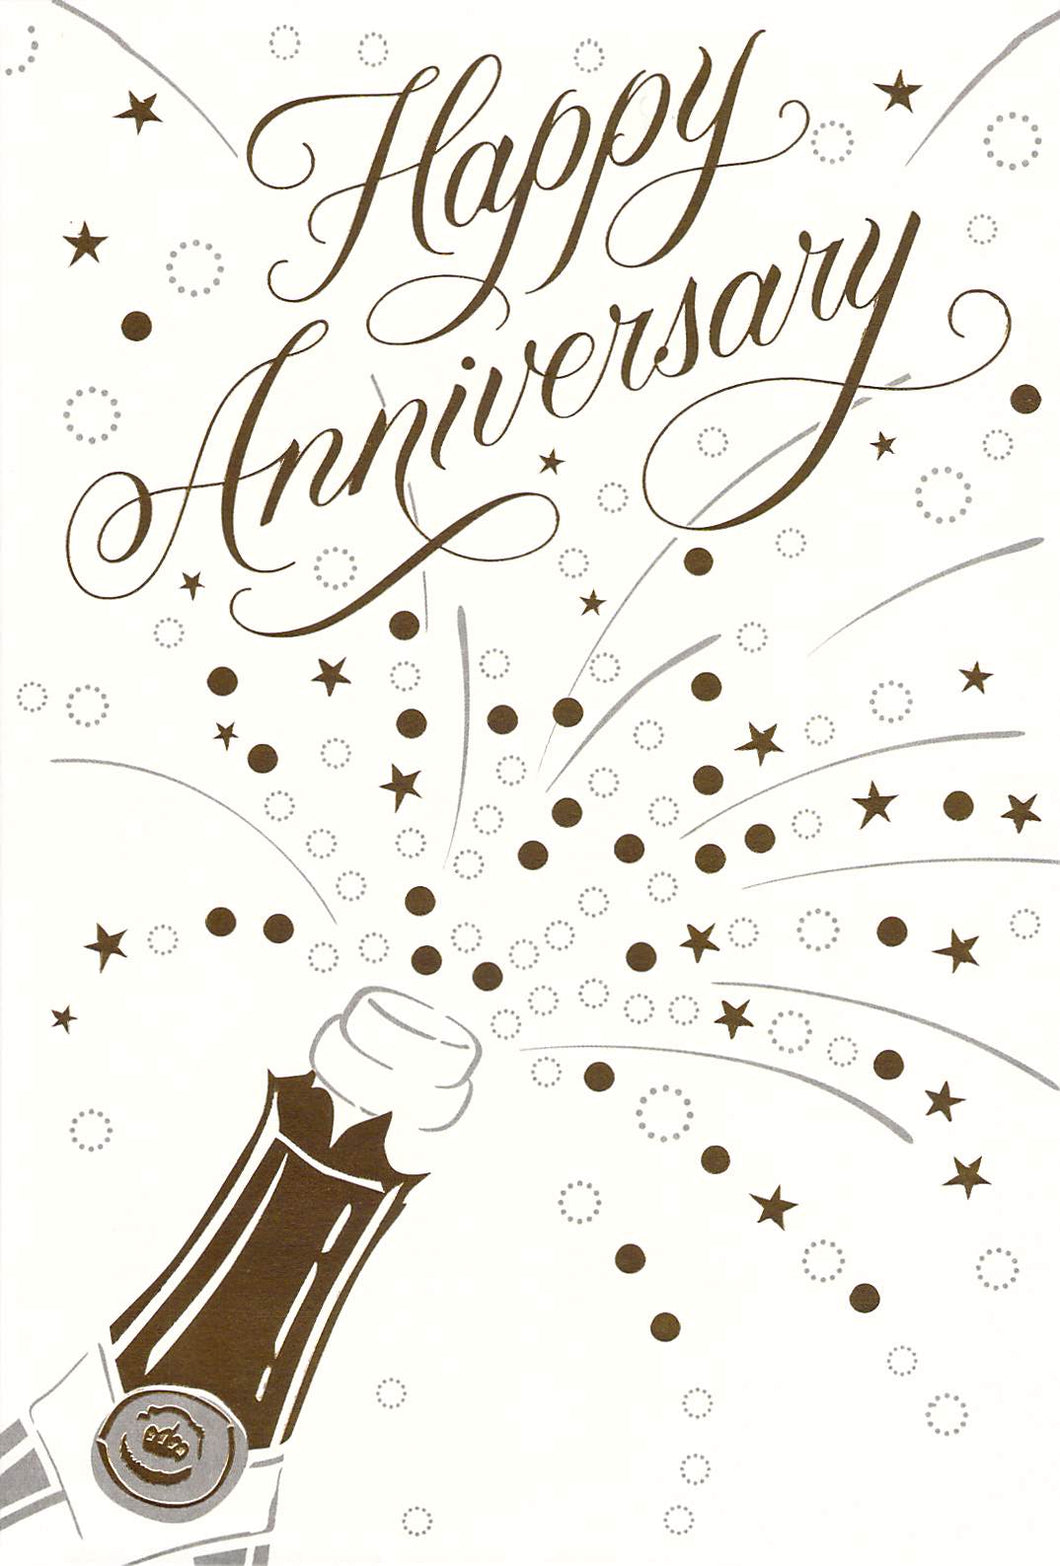 Anniversary - Champaine pop - Unwrapped - Greeting Card - Multi Buy Discount